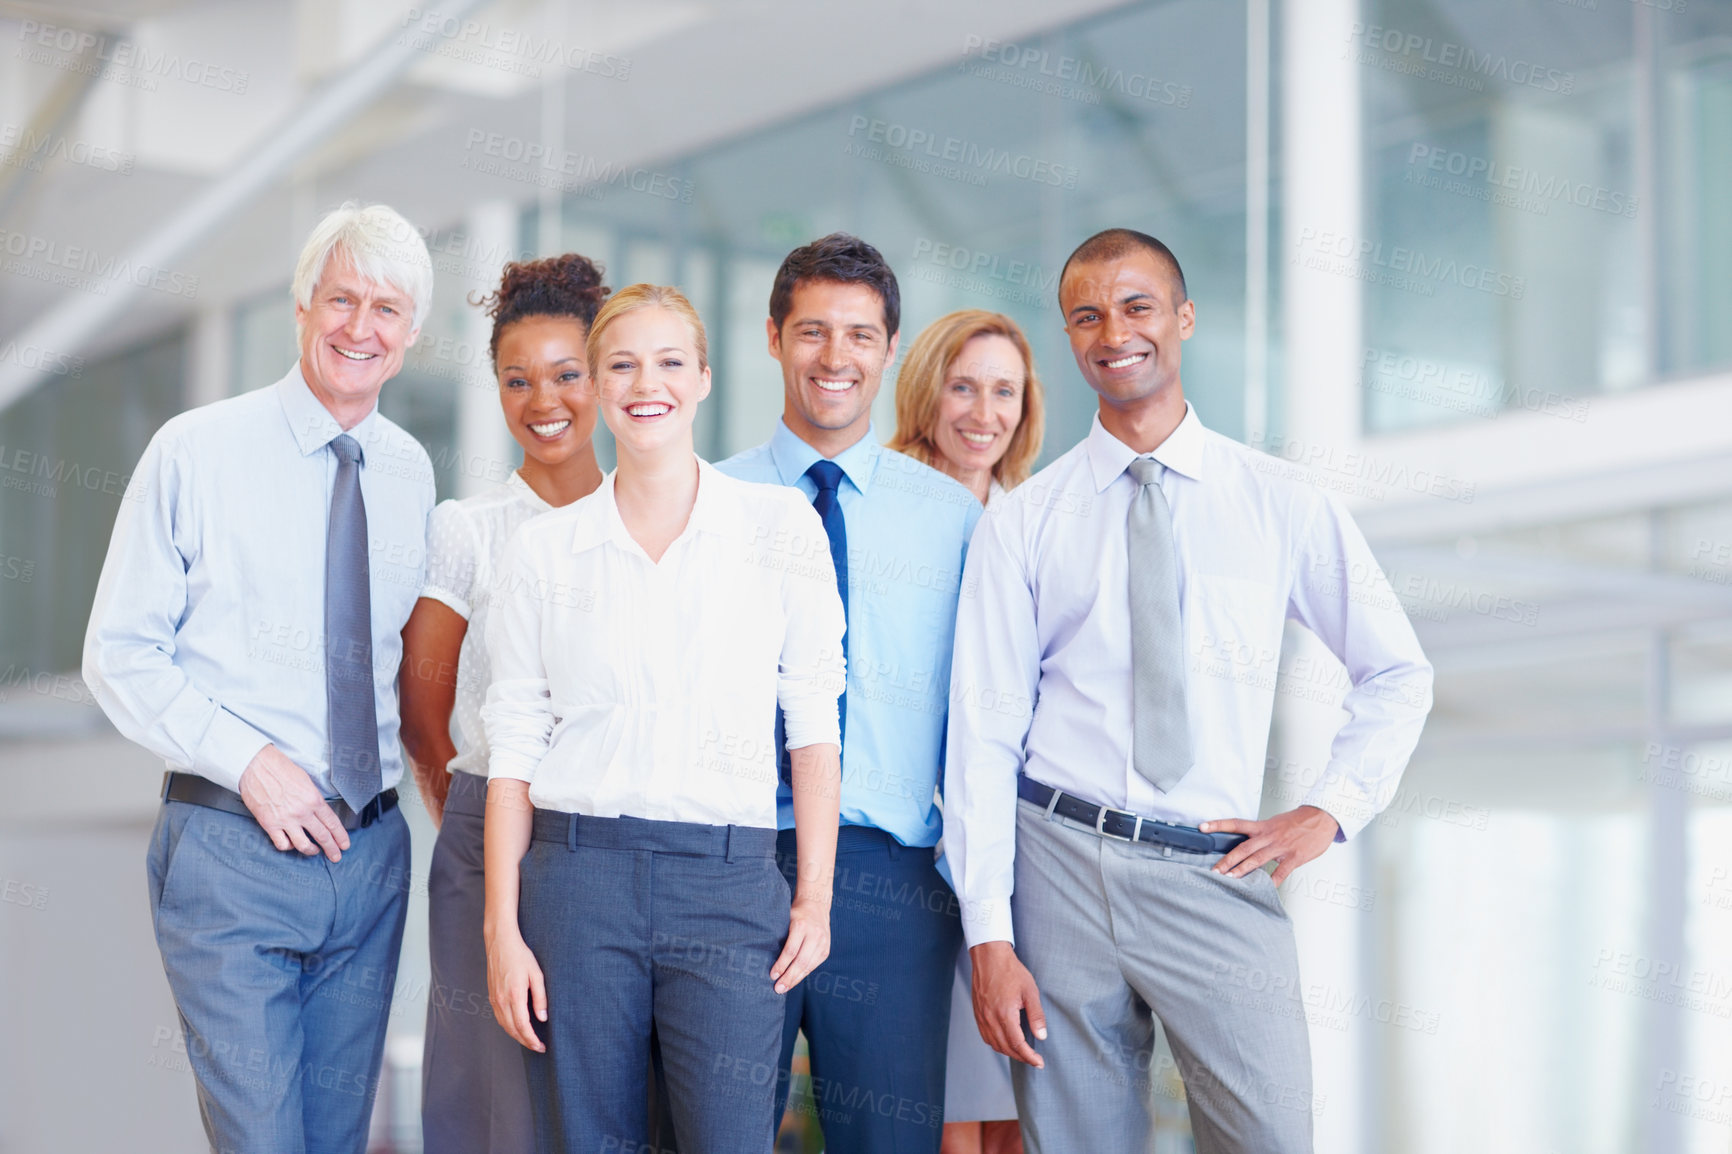 Buy stock photo Portrait of happy multi ethnic business group smiling together at office